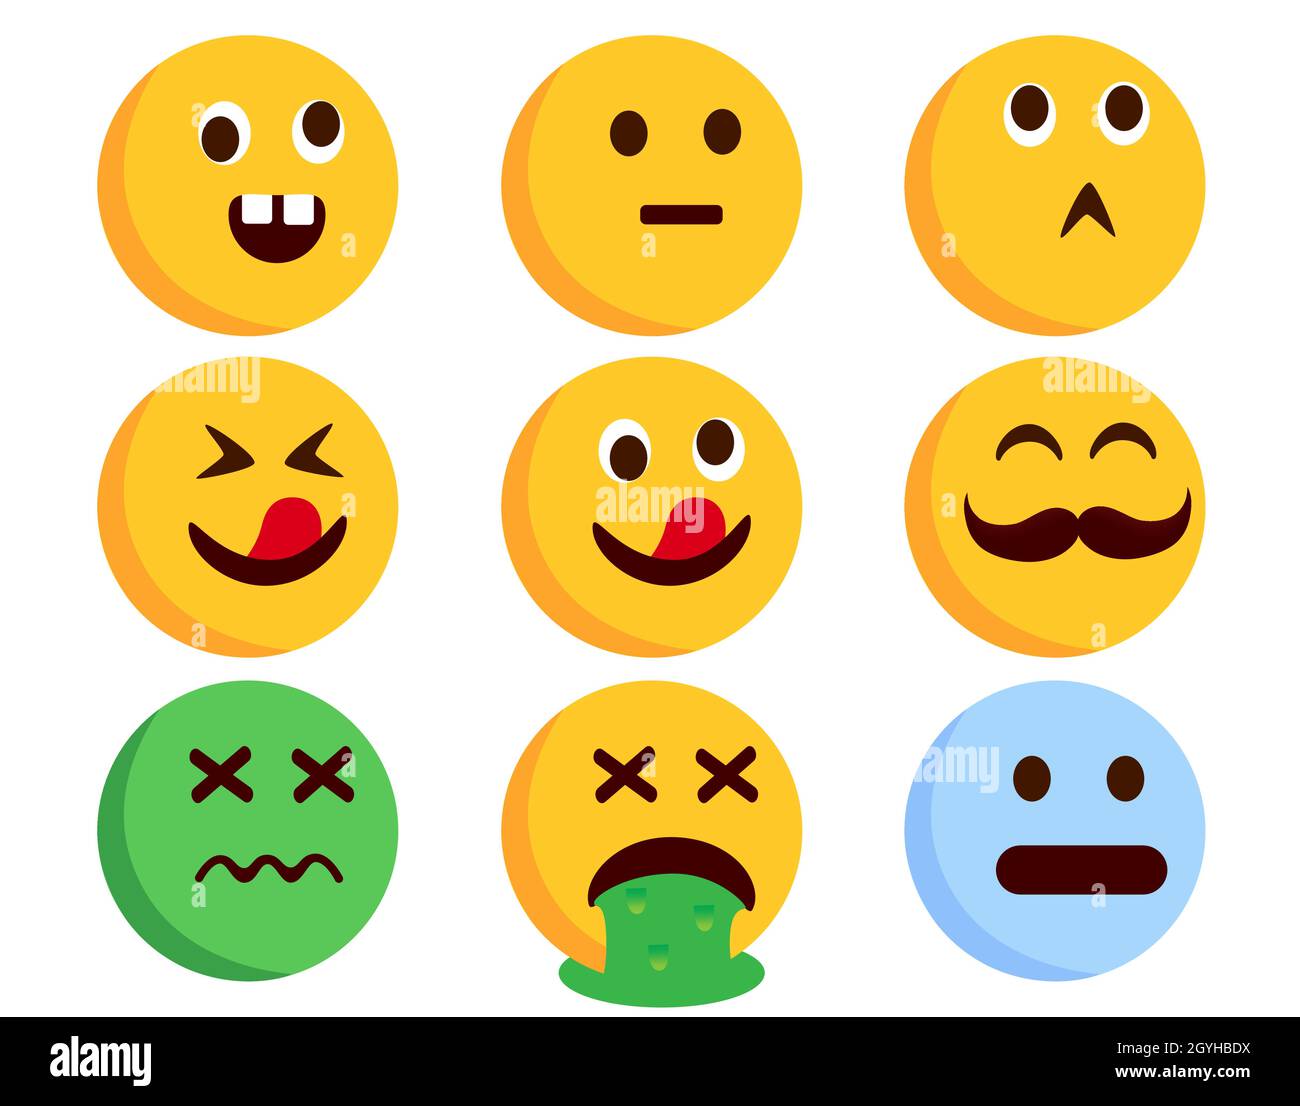 Emoticon smileys character vector set. Emoticons flat characters in crazy, sick, vomit and weird facial expressions for funny emoji smiley collection. Stock Vector